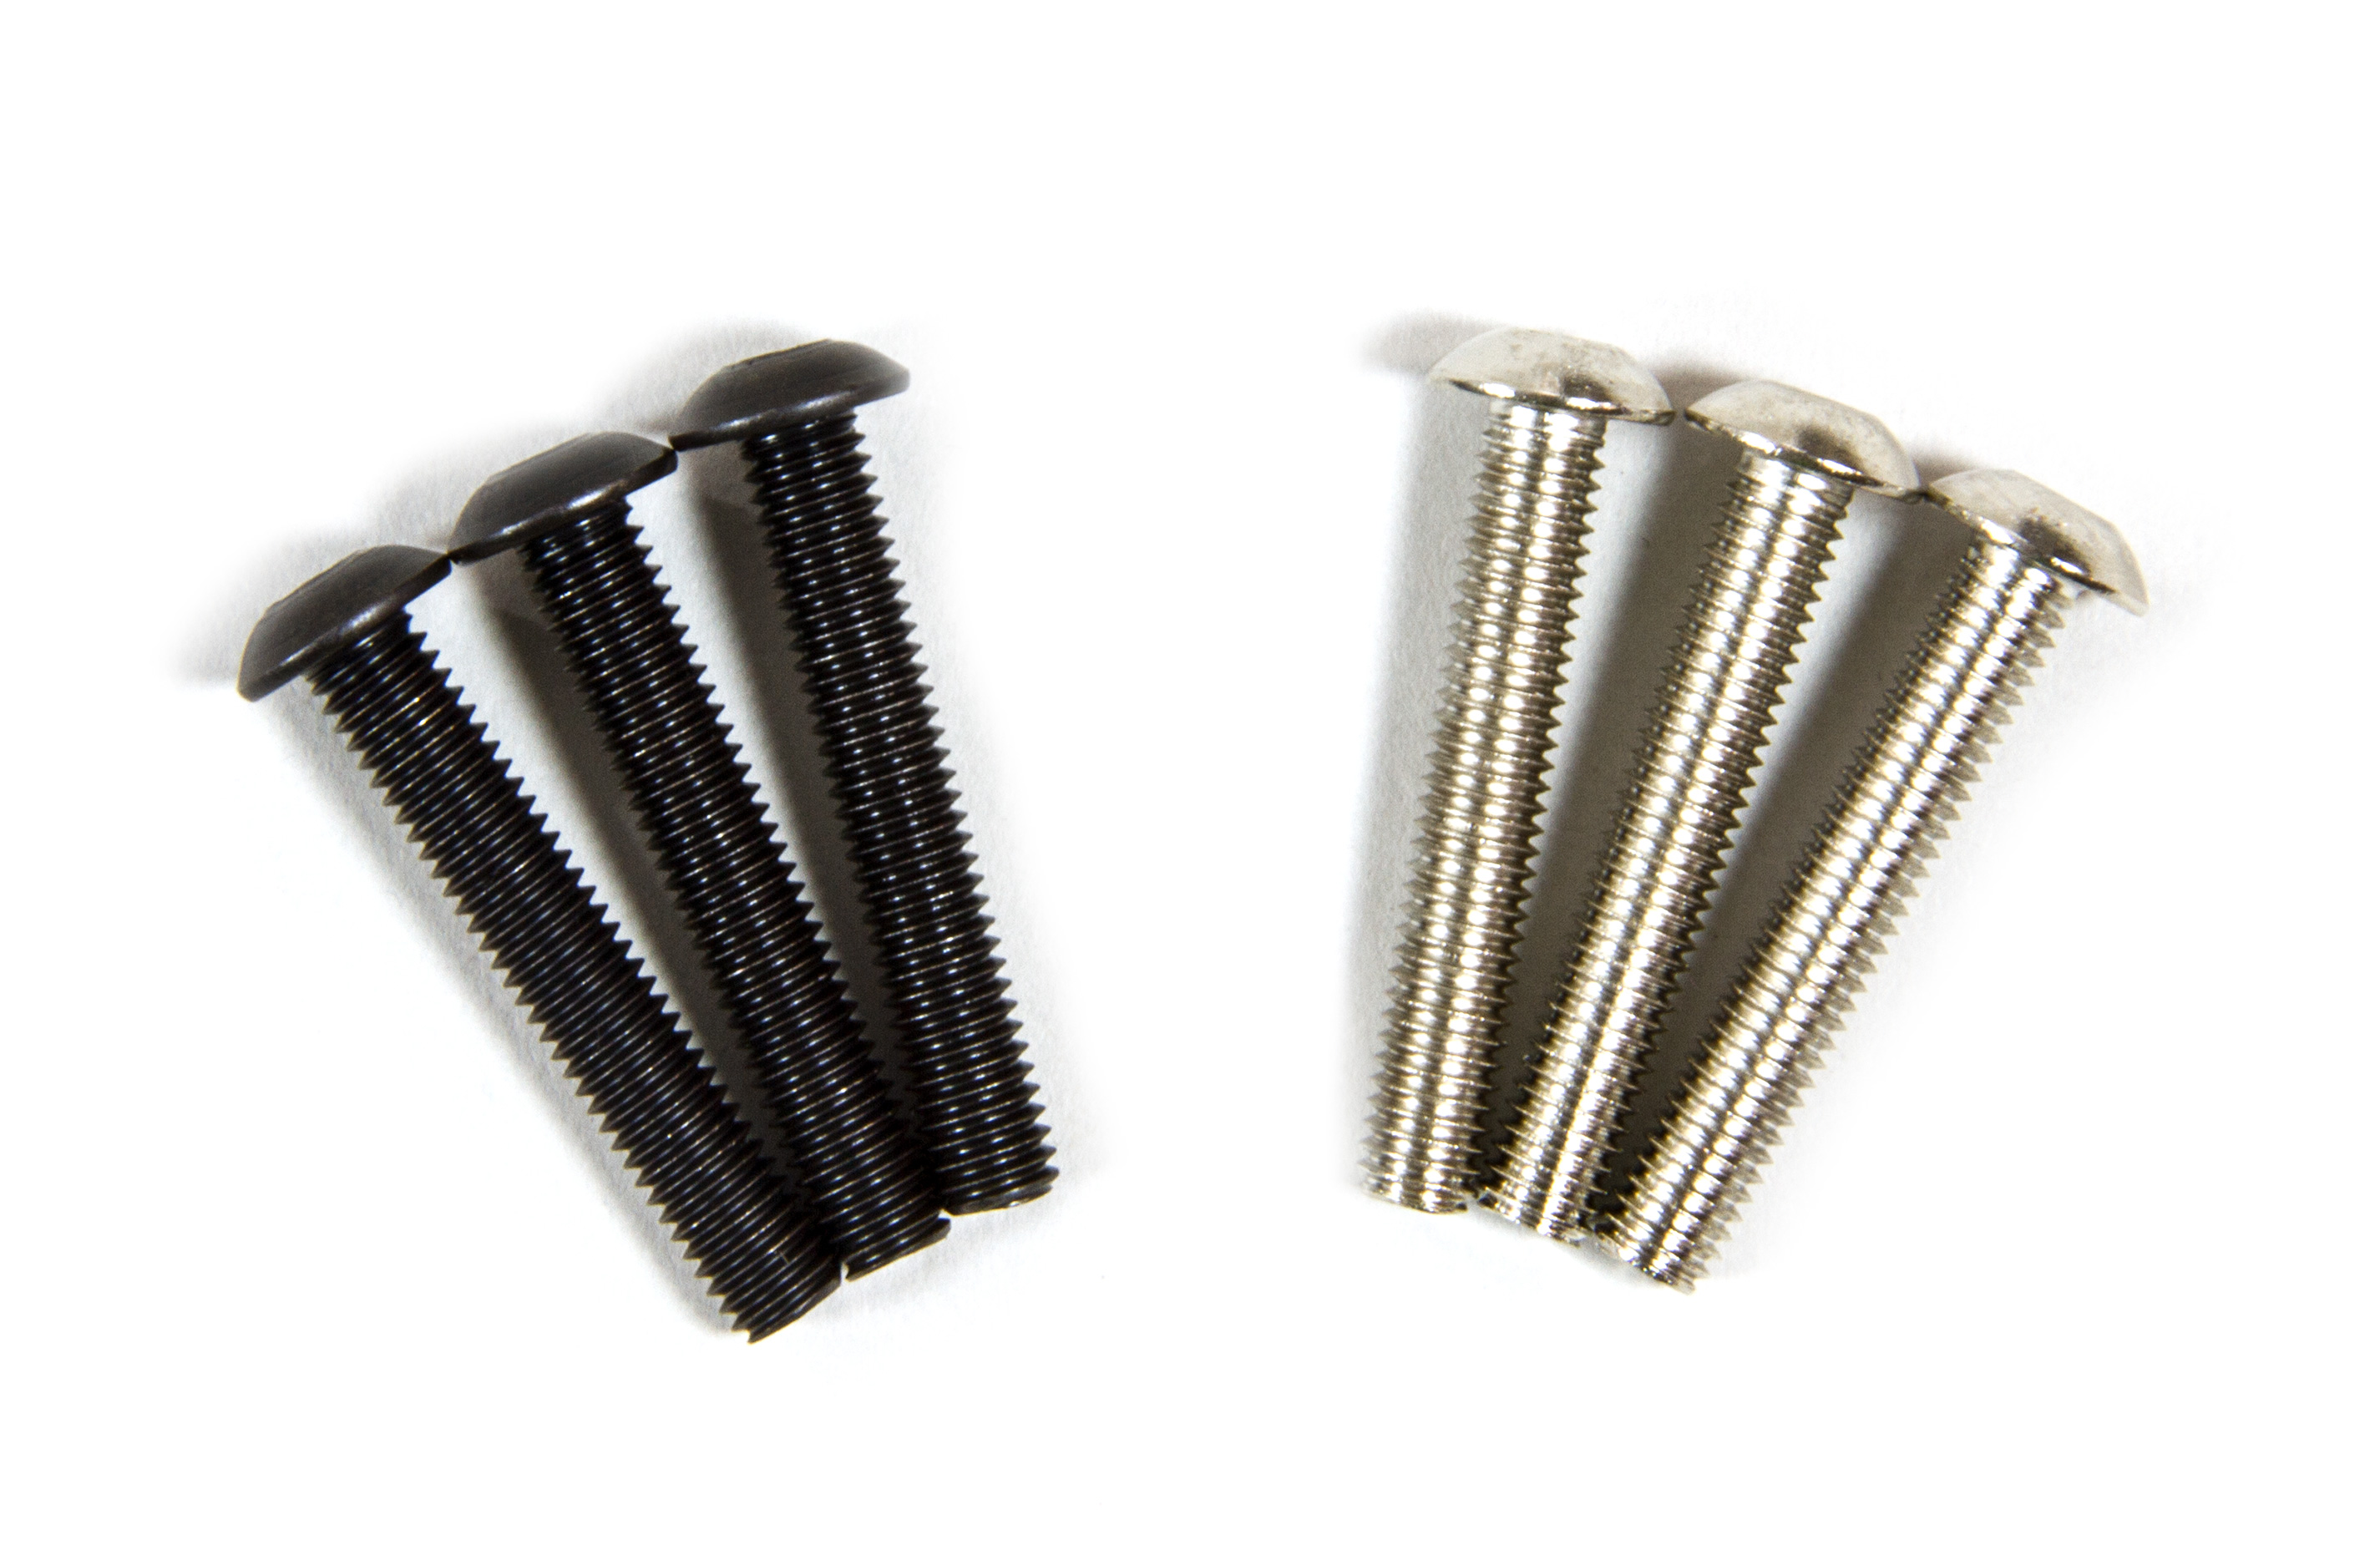 LOSB6579 Losi Lower Shock Mounting Screw Set, 5 mm 5ive-T, TLR 5ive-B and Mini WRC